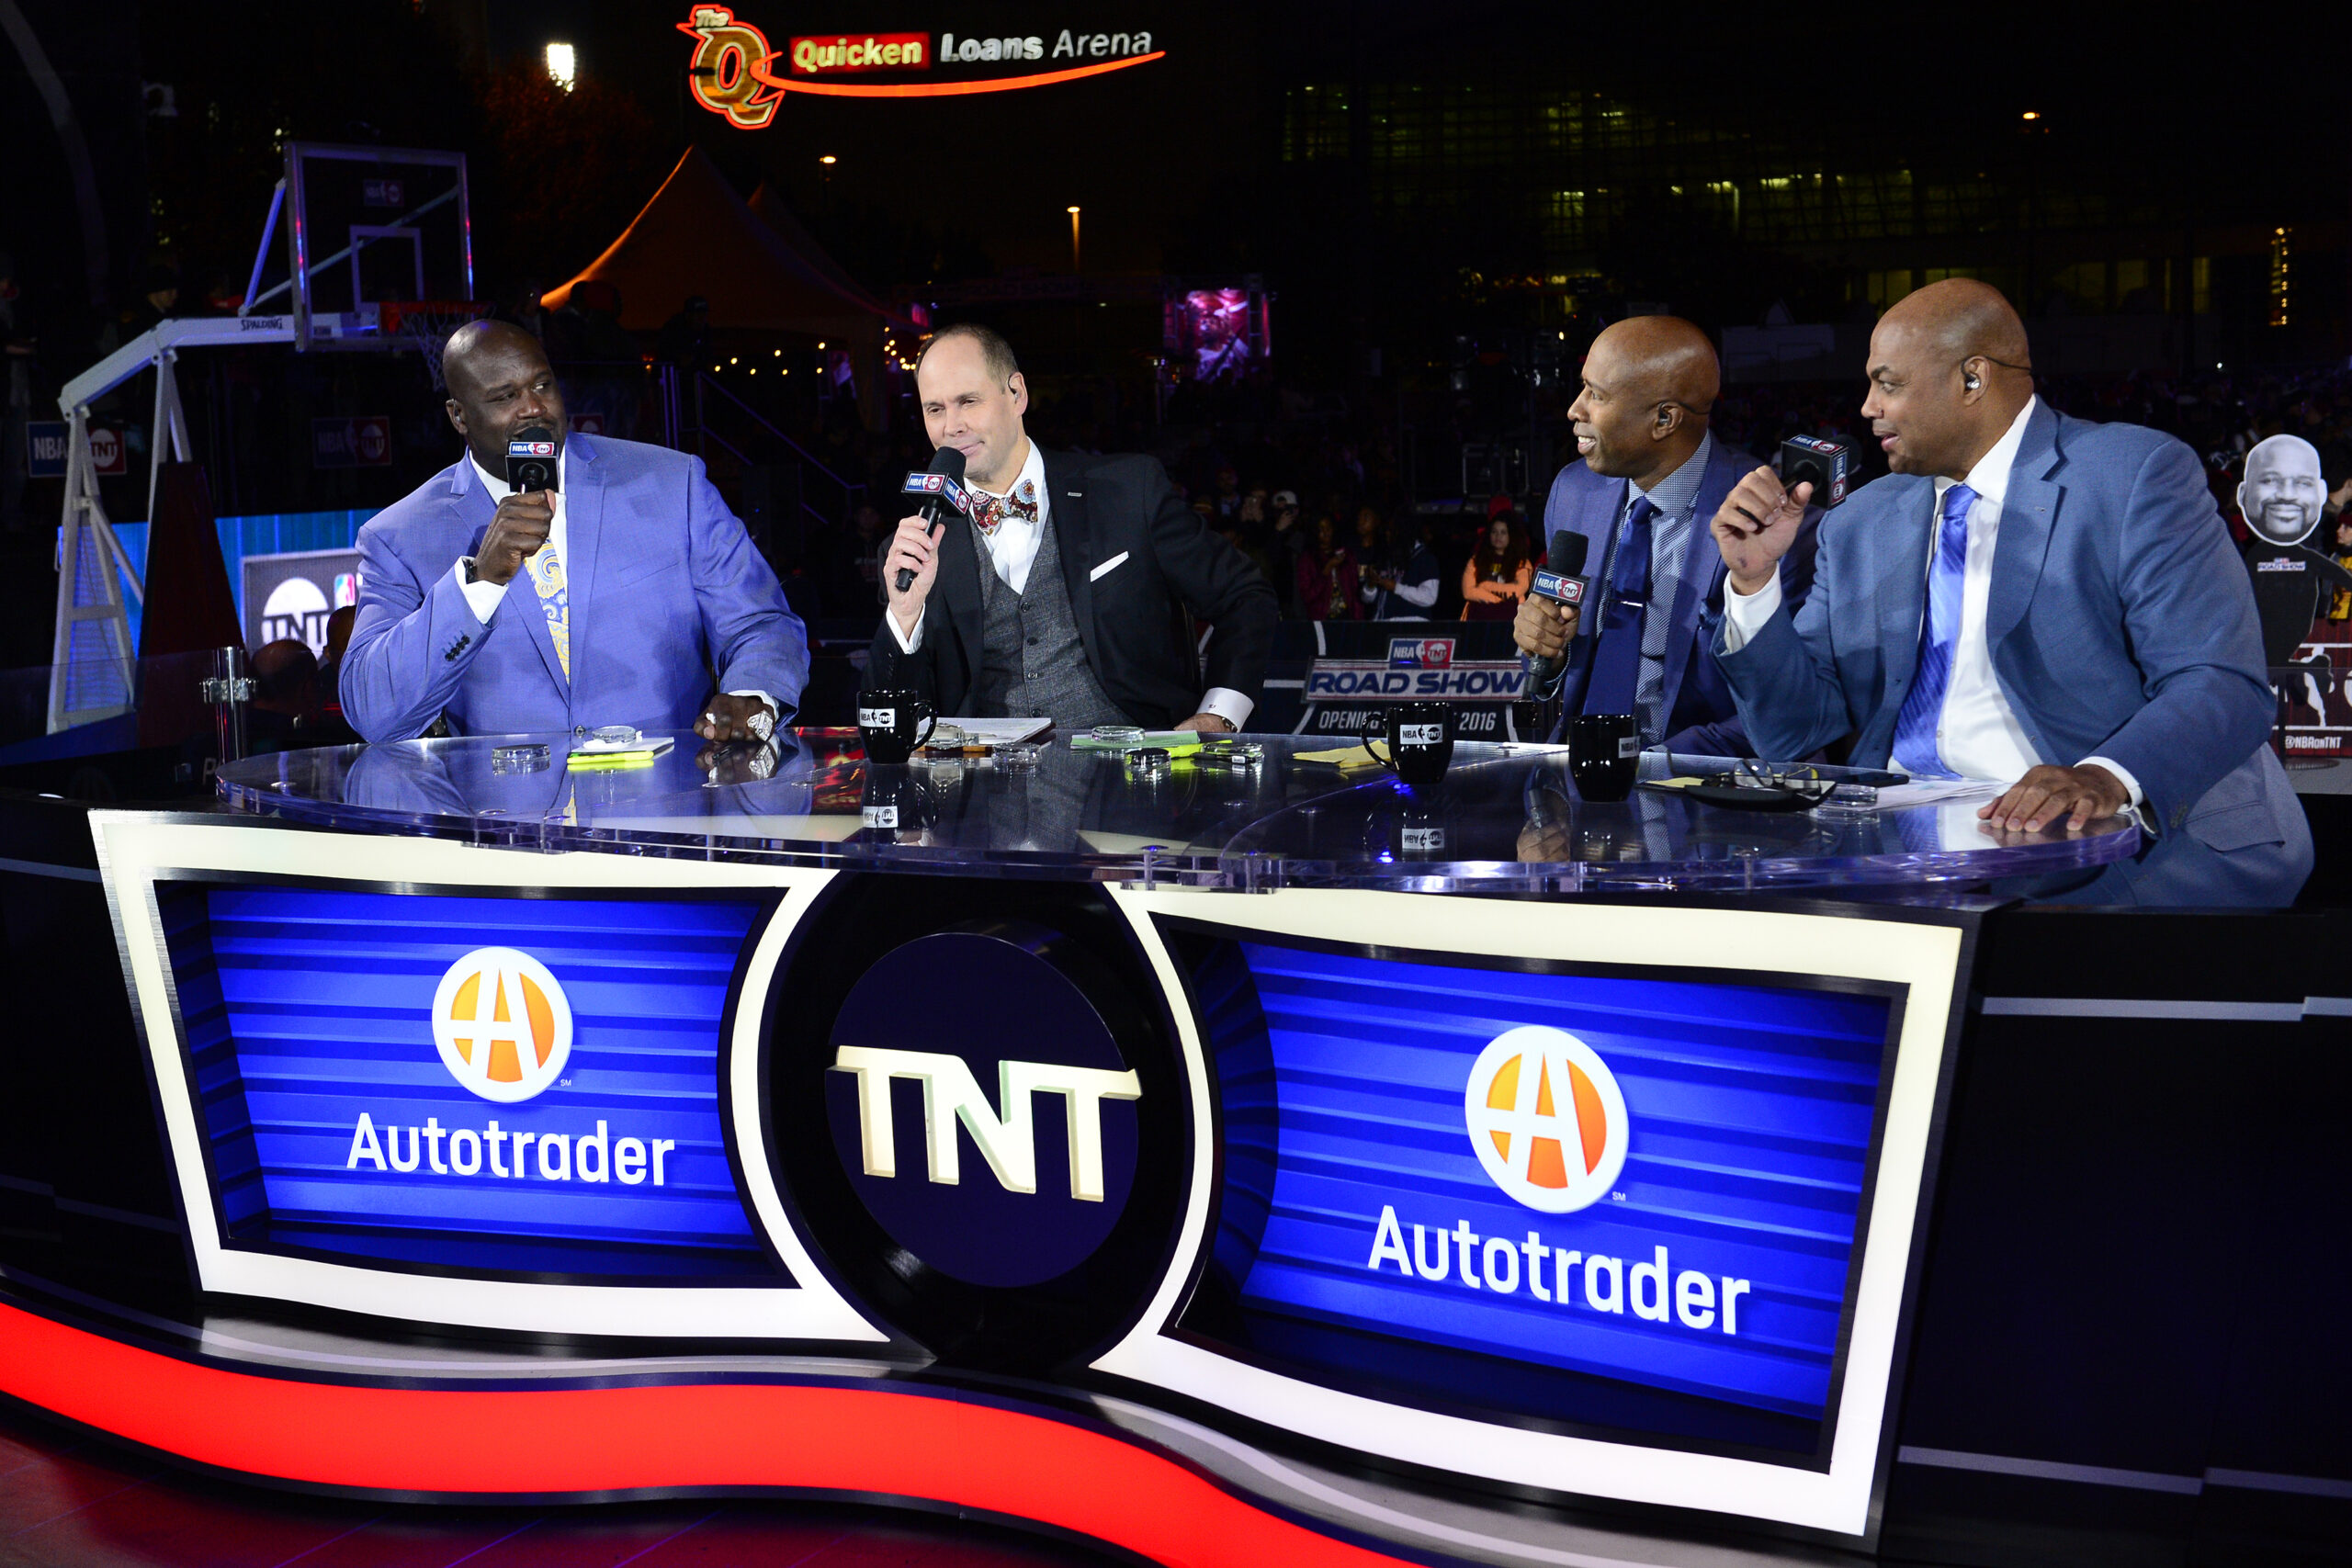 CLEVELAND, OH - OCTOBER 25:  NBA TNT Analysts, Shaquille O'Neal, Ernie Johnson, Kenny Smith and Charles Barkley host a show on October 25, 2016 before the New York Knicks game against the Cleveland Cavaliers at Quicken Loans Arena in Cleveland, Ohio.  NOTE TO USER: User expressly acknowledges and agrees that, by downloading and or using this Photograph, user is consenting to the terms and conditions of the Getty Images License Agreement. Mandatory Copyright Notice: Copyright 2016 NBAE (Photo by David Dow/NBAE via Getty Images)